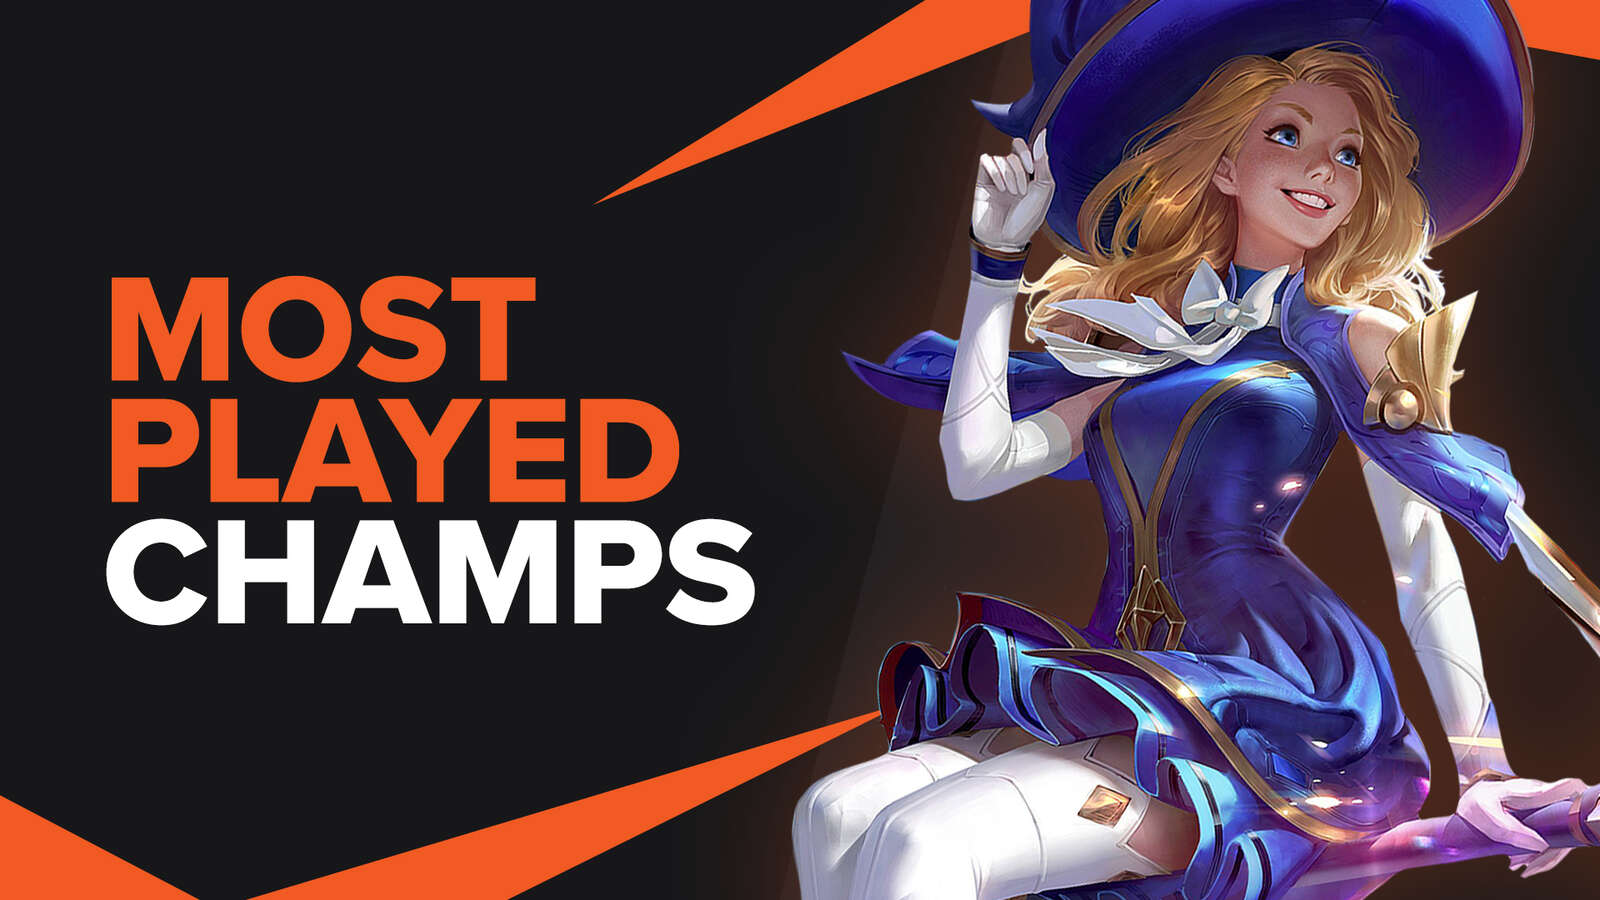 Most Played Champions in League of Legends